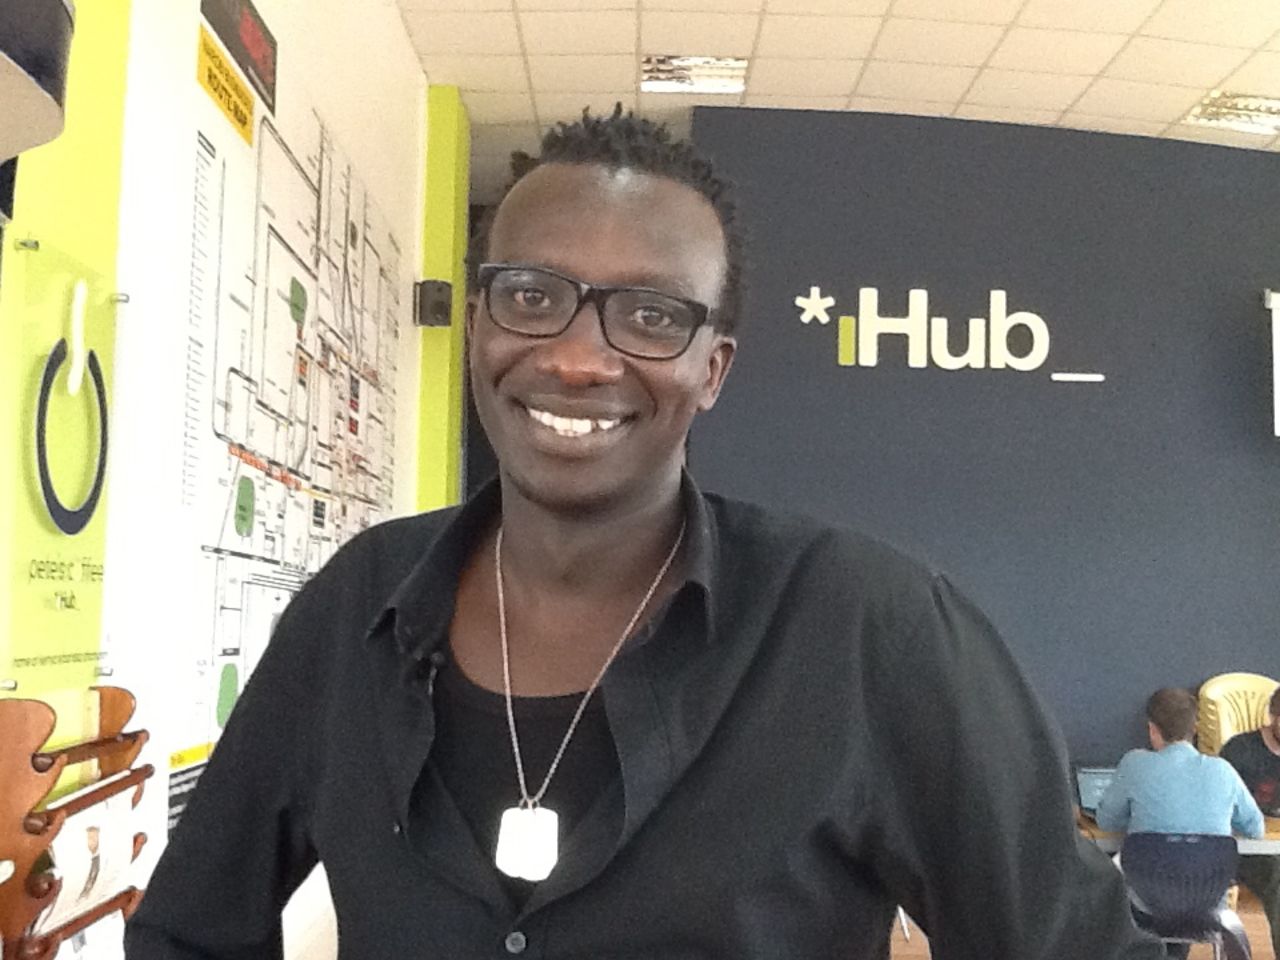 Tosh Juma manages the iHub, which is described by its founders as "an open space for the tech community in Kenya with great ideas that will lead to development of new technologies in Kenya."